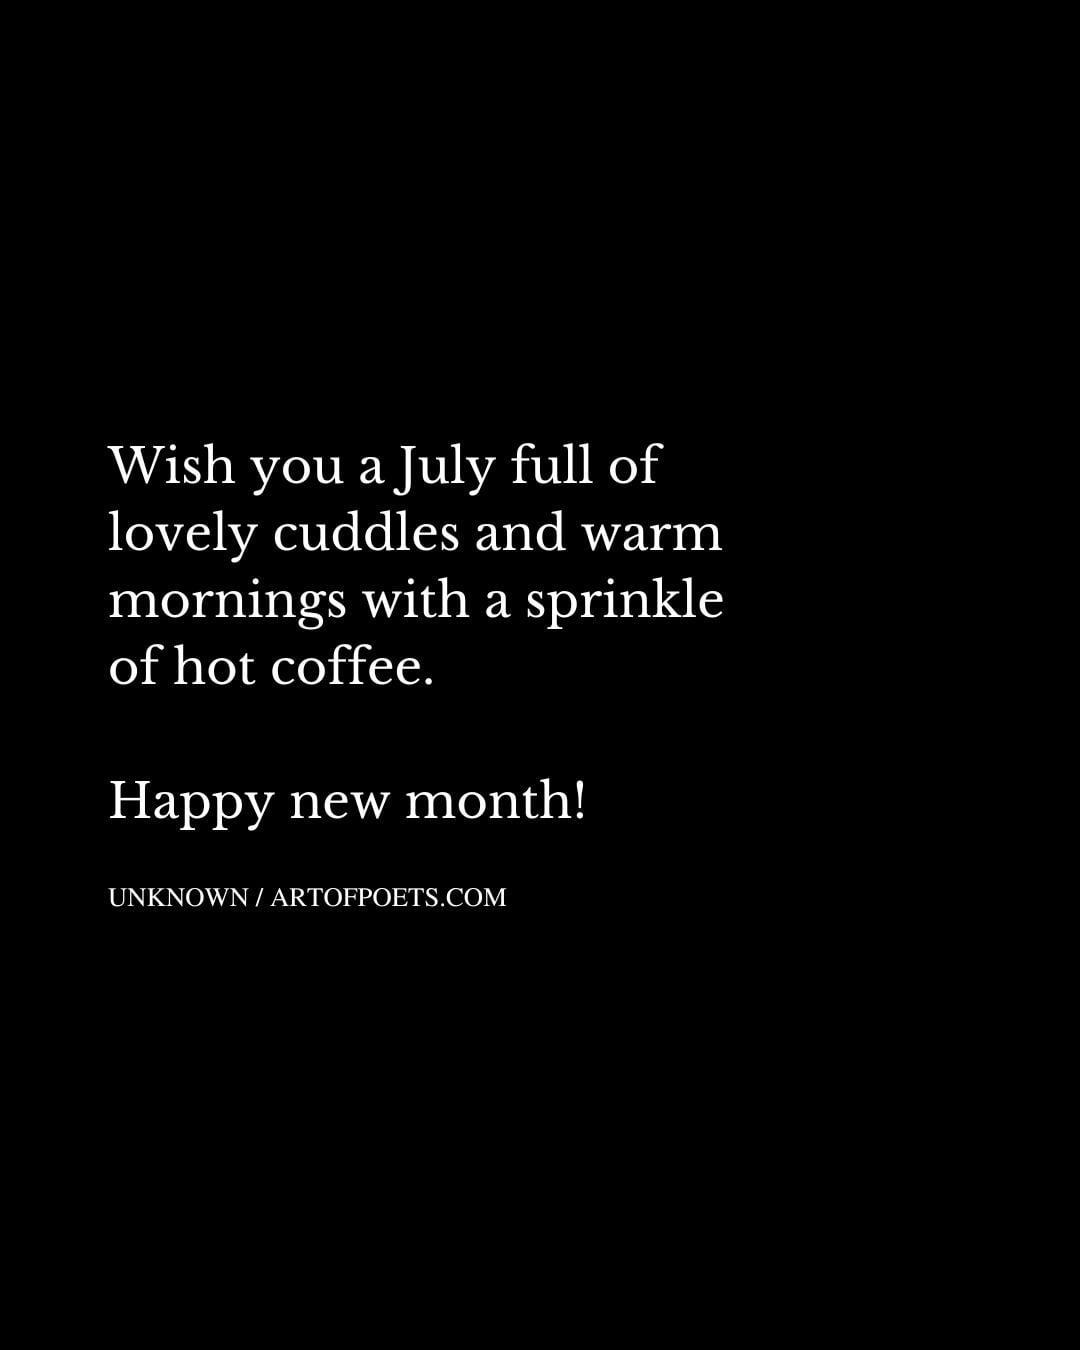 Wish you a July full of lovely cuddles and warm mornings with a sprinkle of hot coffee. Happy new month